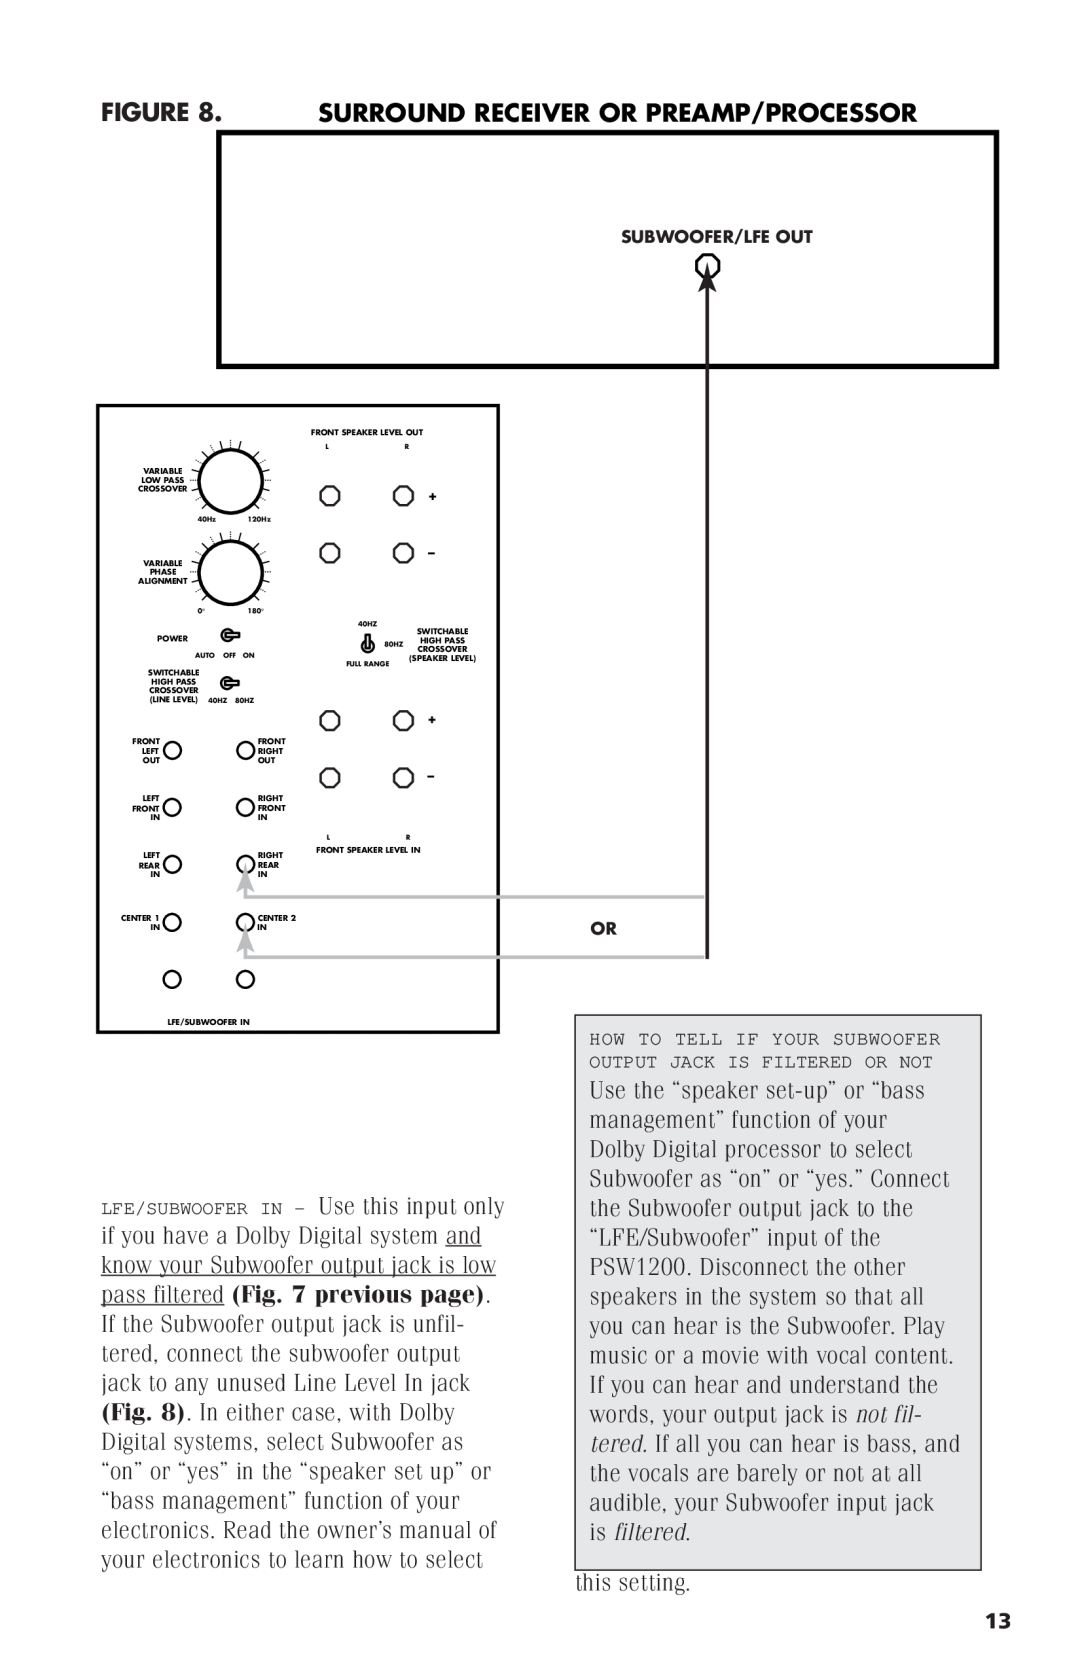 Polk Audio PSW1200 instruction manual Surround Receiver Or Preamp/Processor, pass filteredFig. 7 previous page, is filtered 